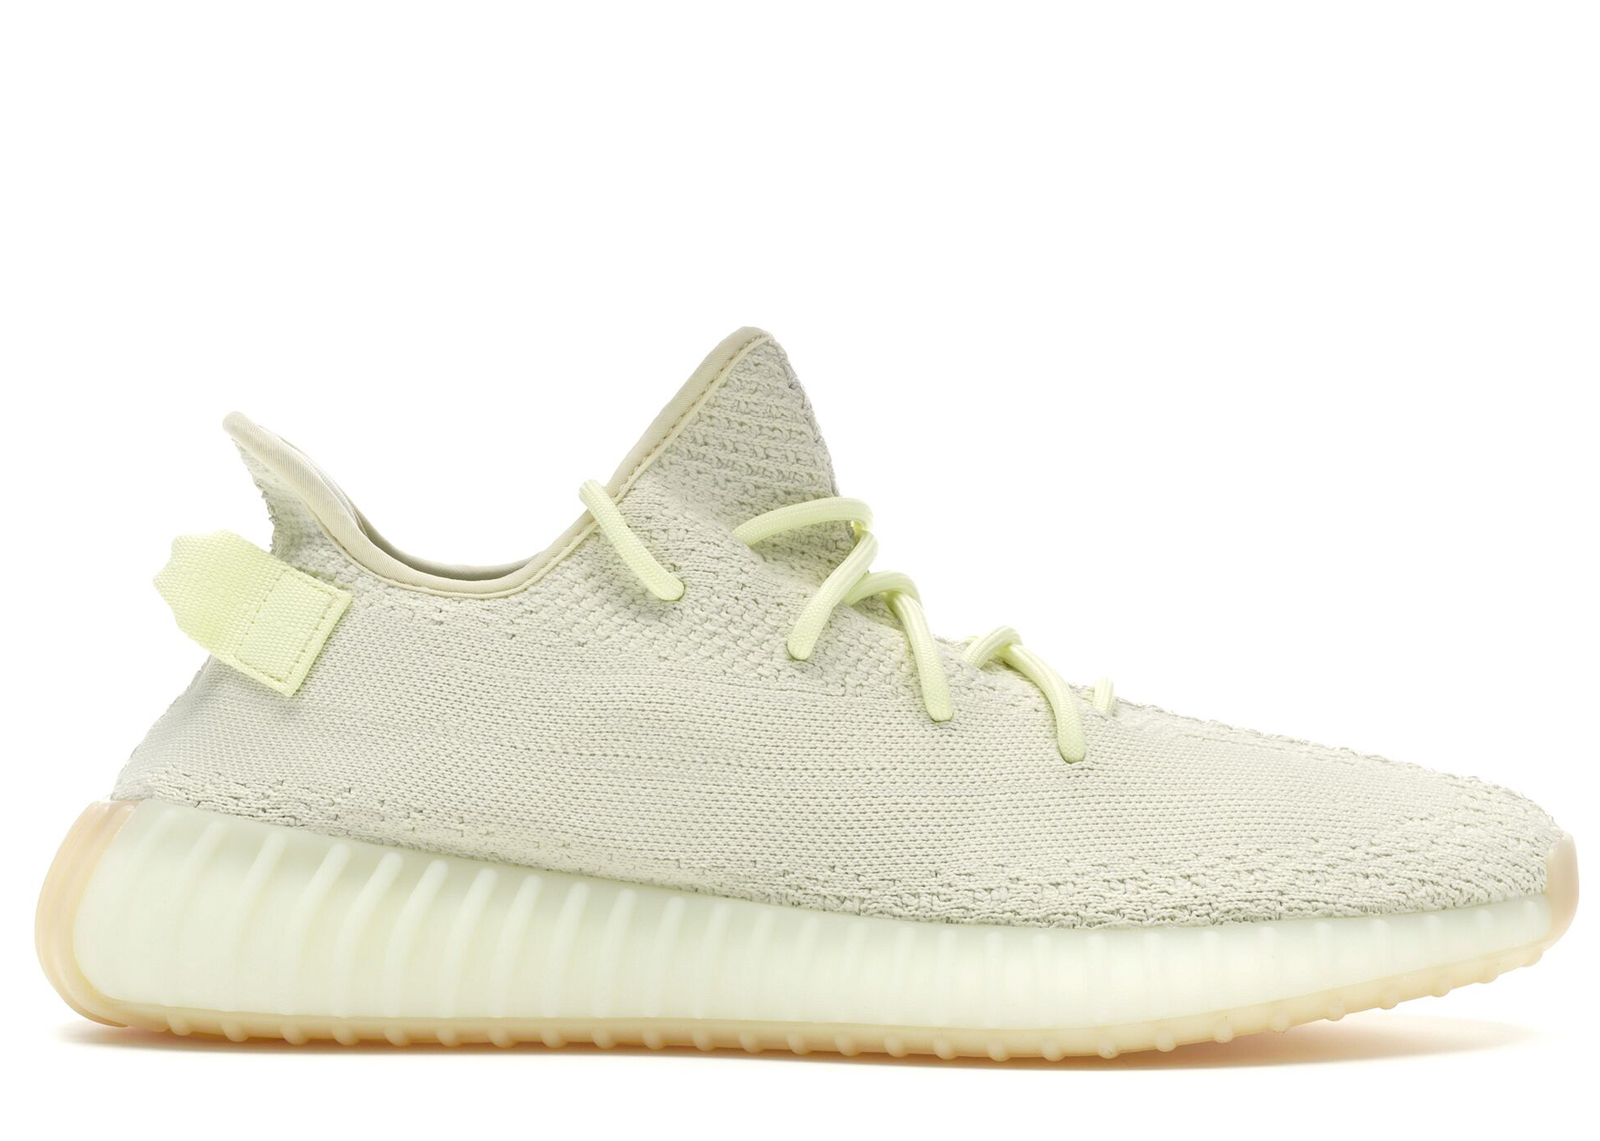 adidas Yeezy Boost 350 V2 Butter - F36980 - US